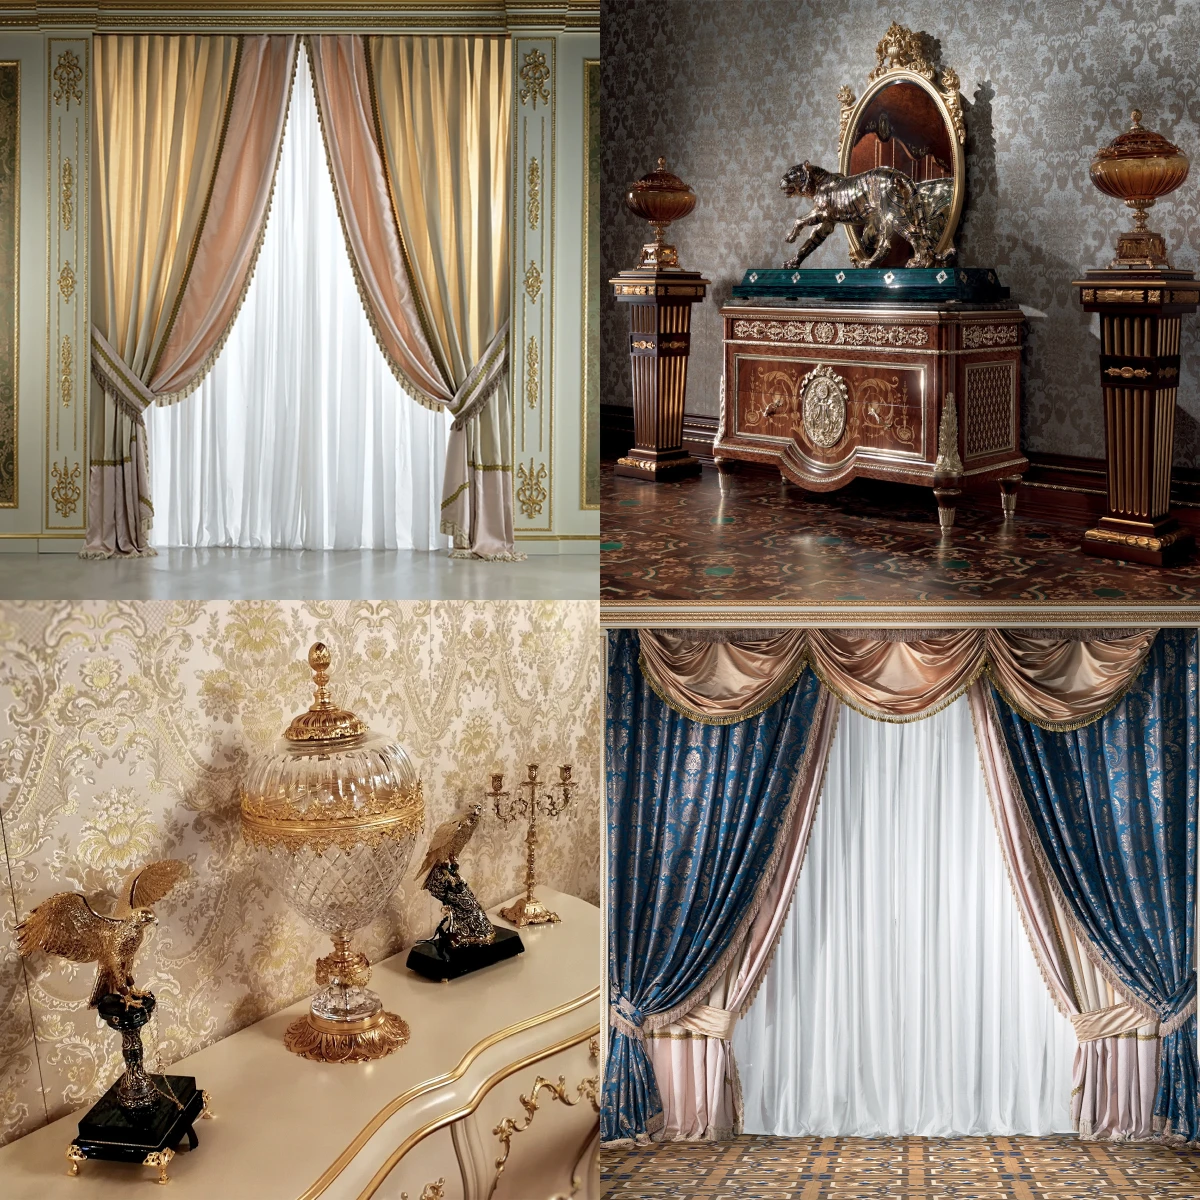 Decor accessories to decorate beautiful royal villas and palaces with gold leaf 24 karats items